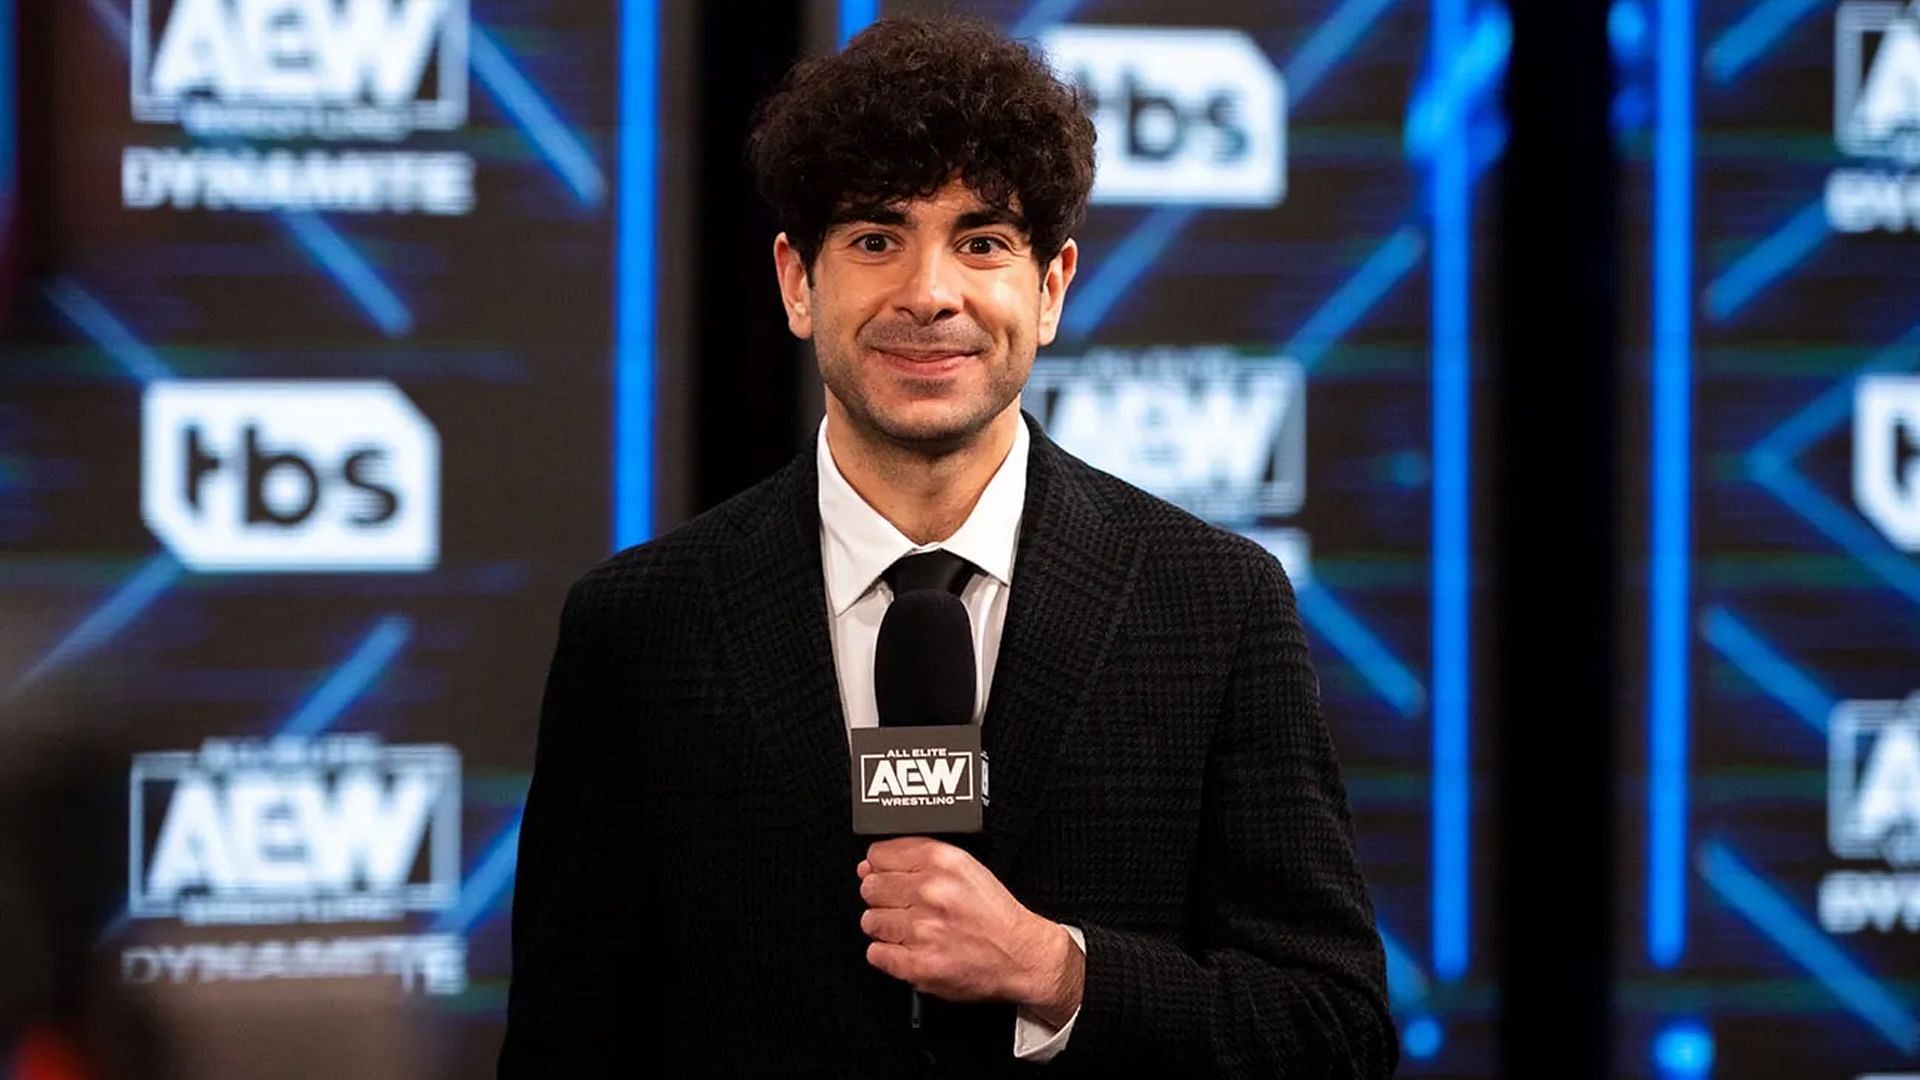 Tony Khan has dropped some info on a major AEW pay-per-view